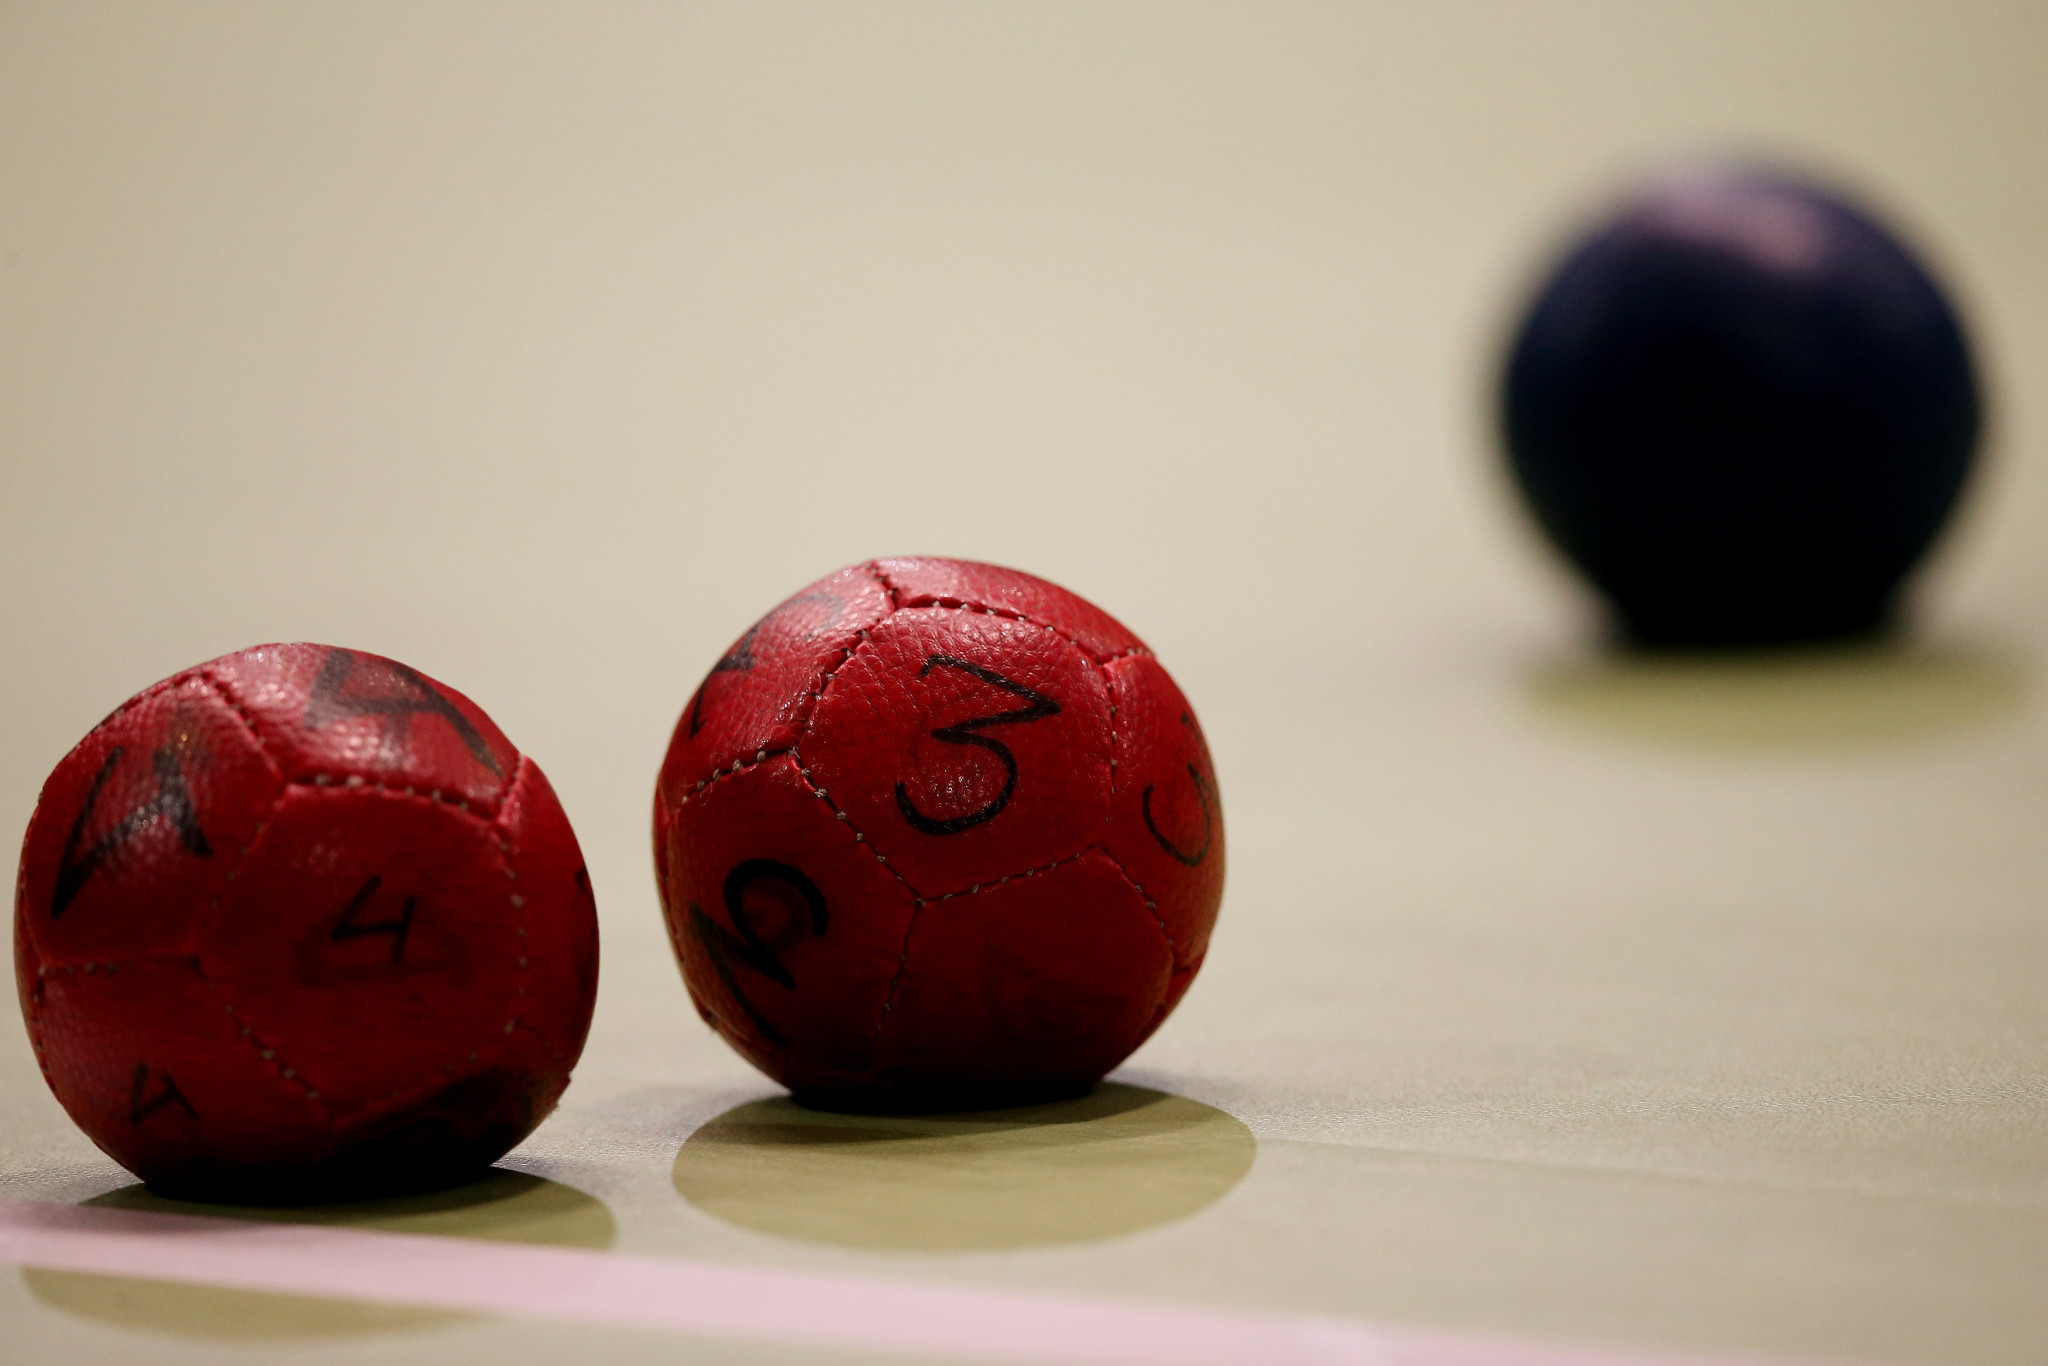 BISFed releases return-to-play protocol for staging boccia events amid COVID-19 pandemic